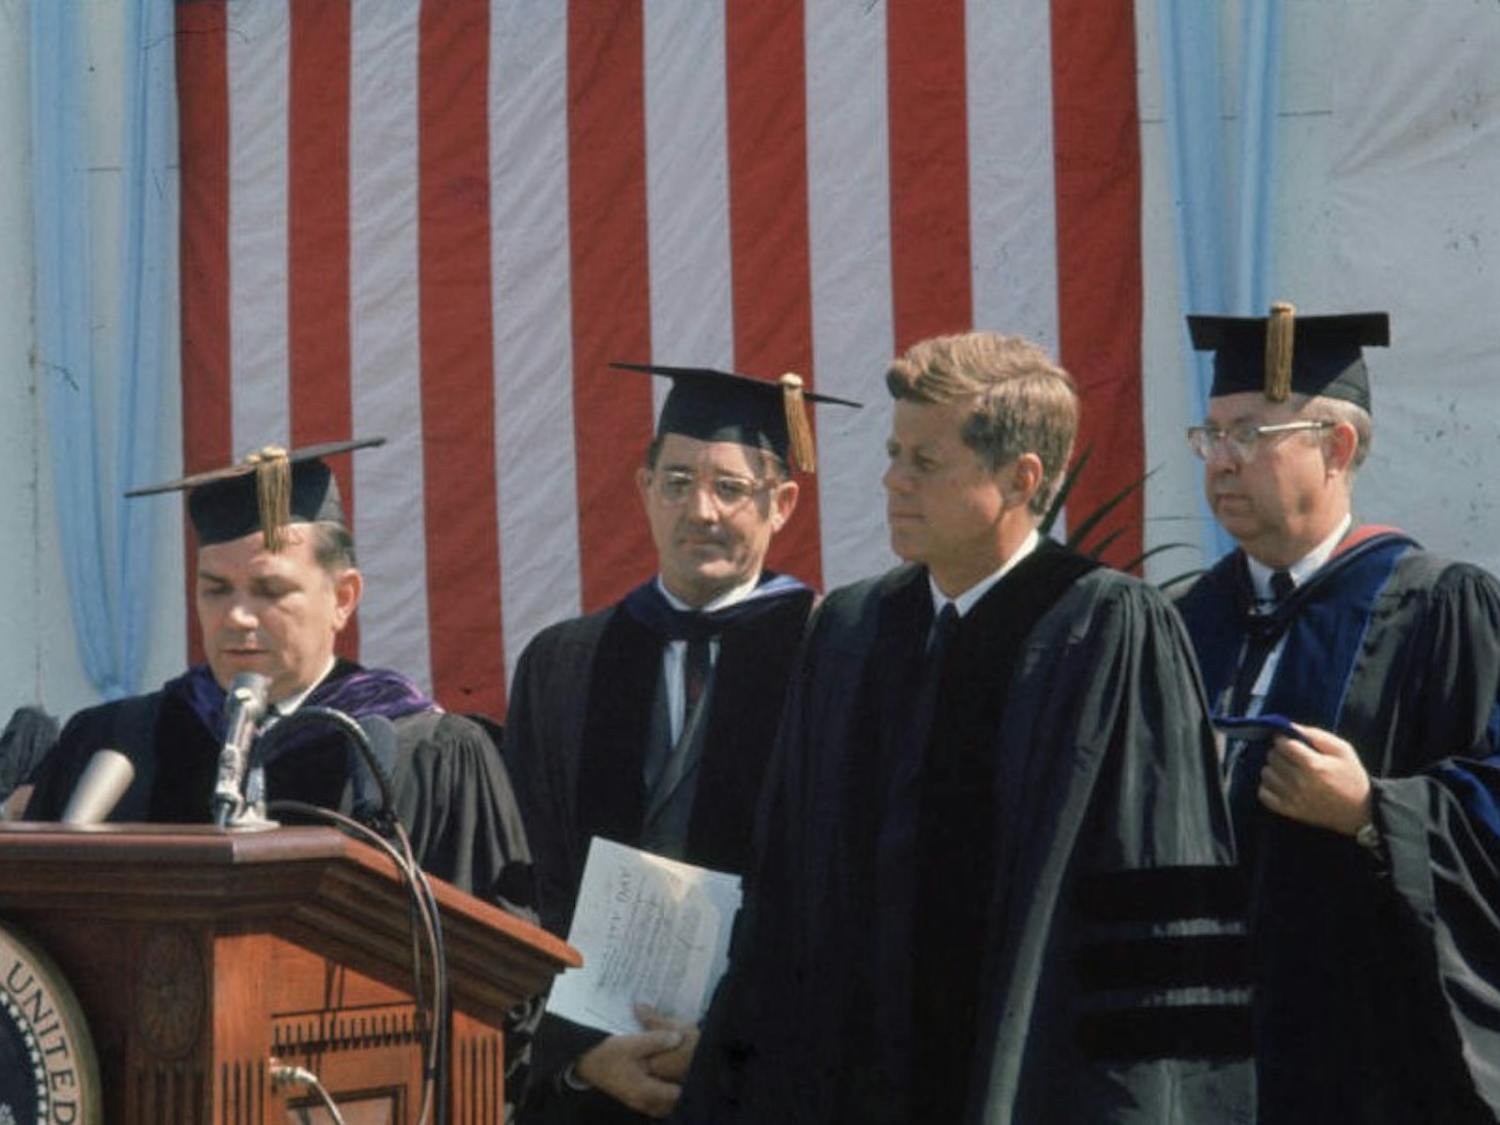 UNC Chancellor William Aycock pictured speaking at podium, with UNC System President Bill Friday, President John F. Kennedy, and distinguished professor James L. Godfrey at University Day, October 12, 1961 at UNC Chapel Hill.